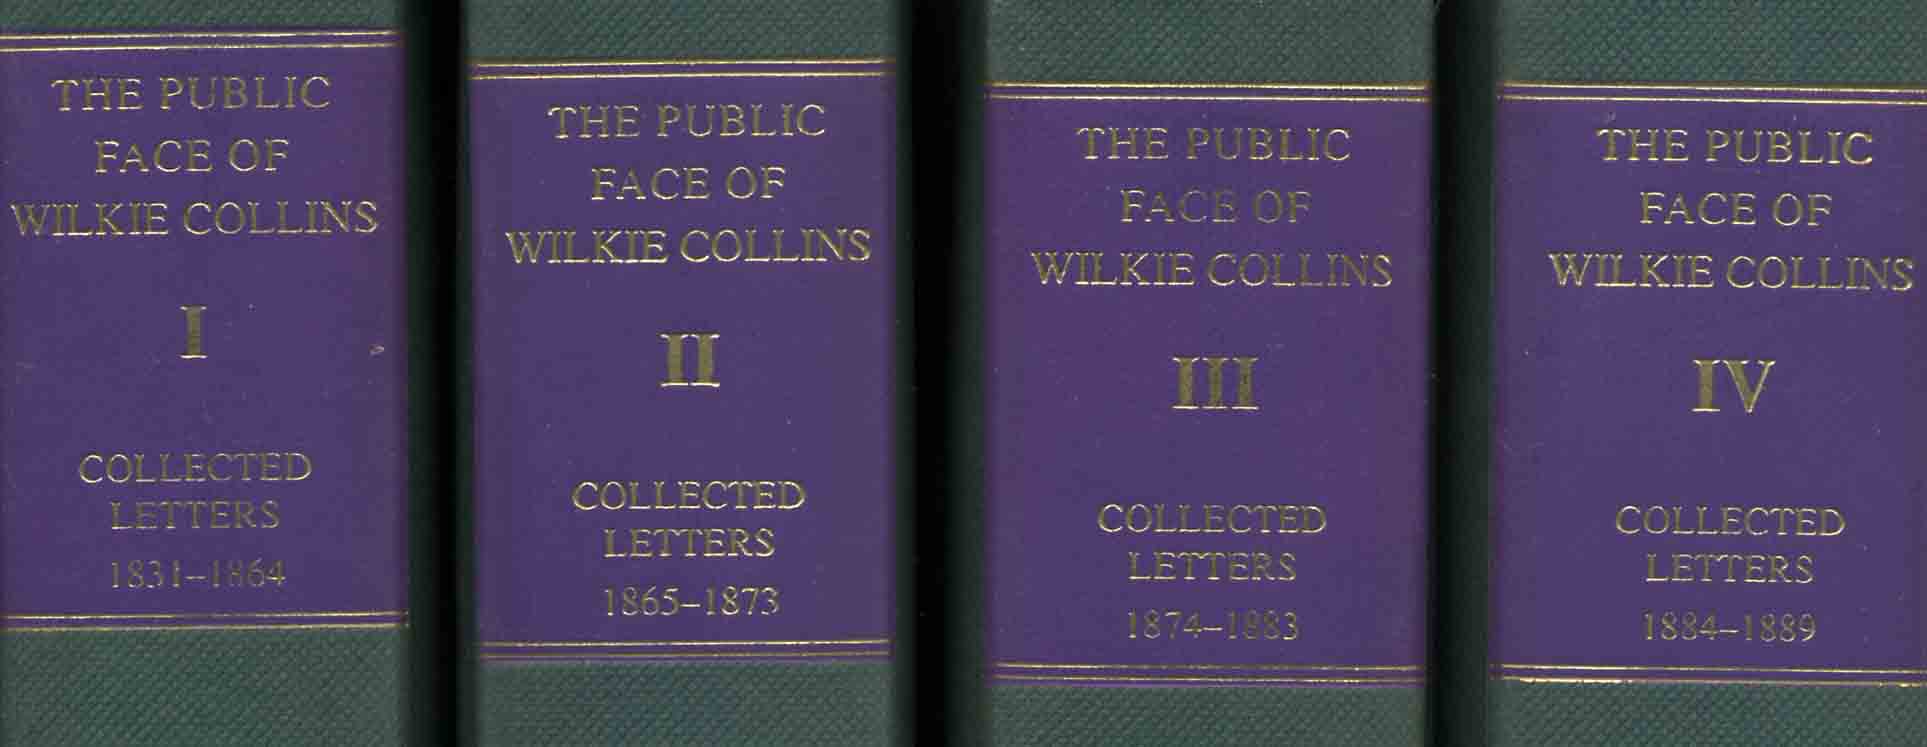 Public Face of WIlkie Collins